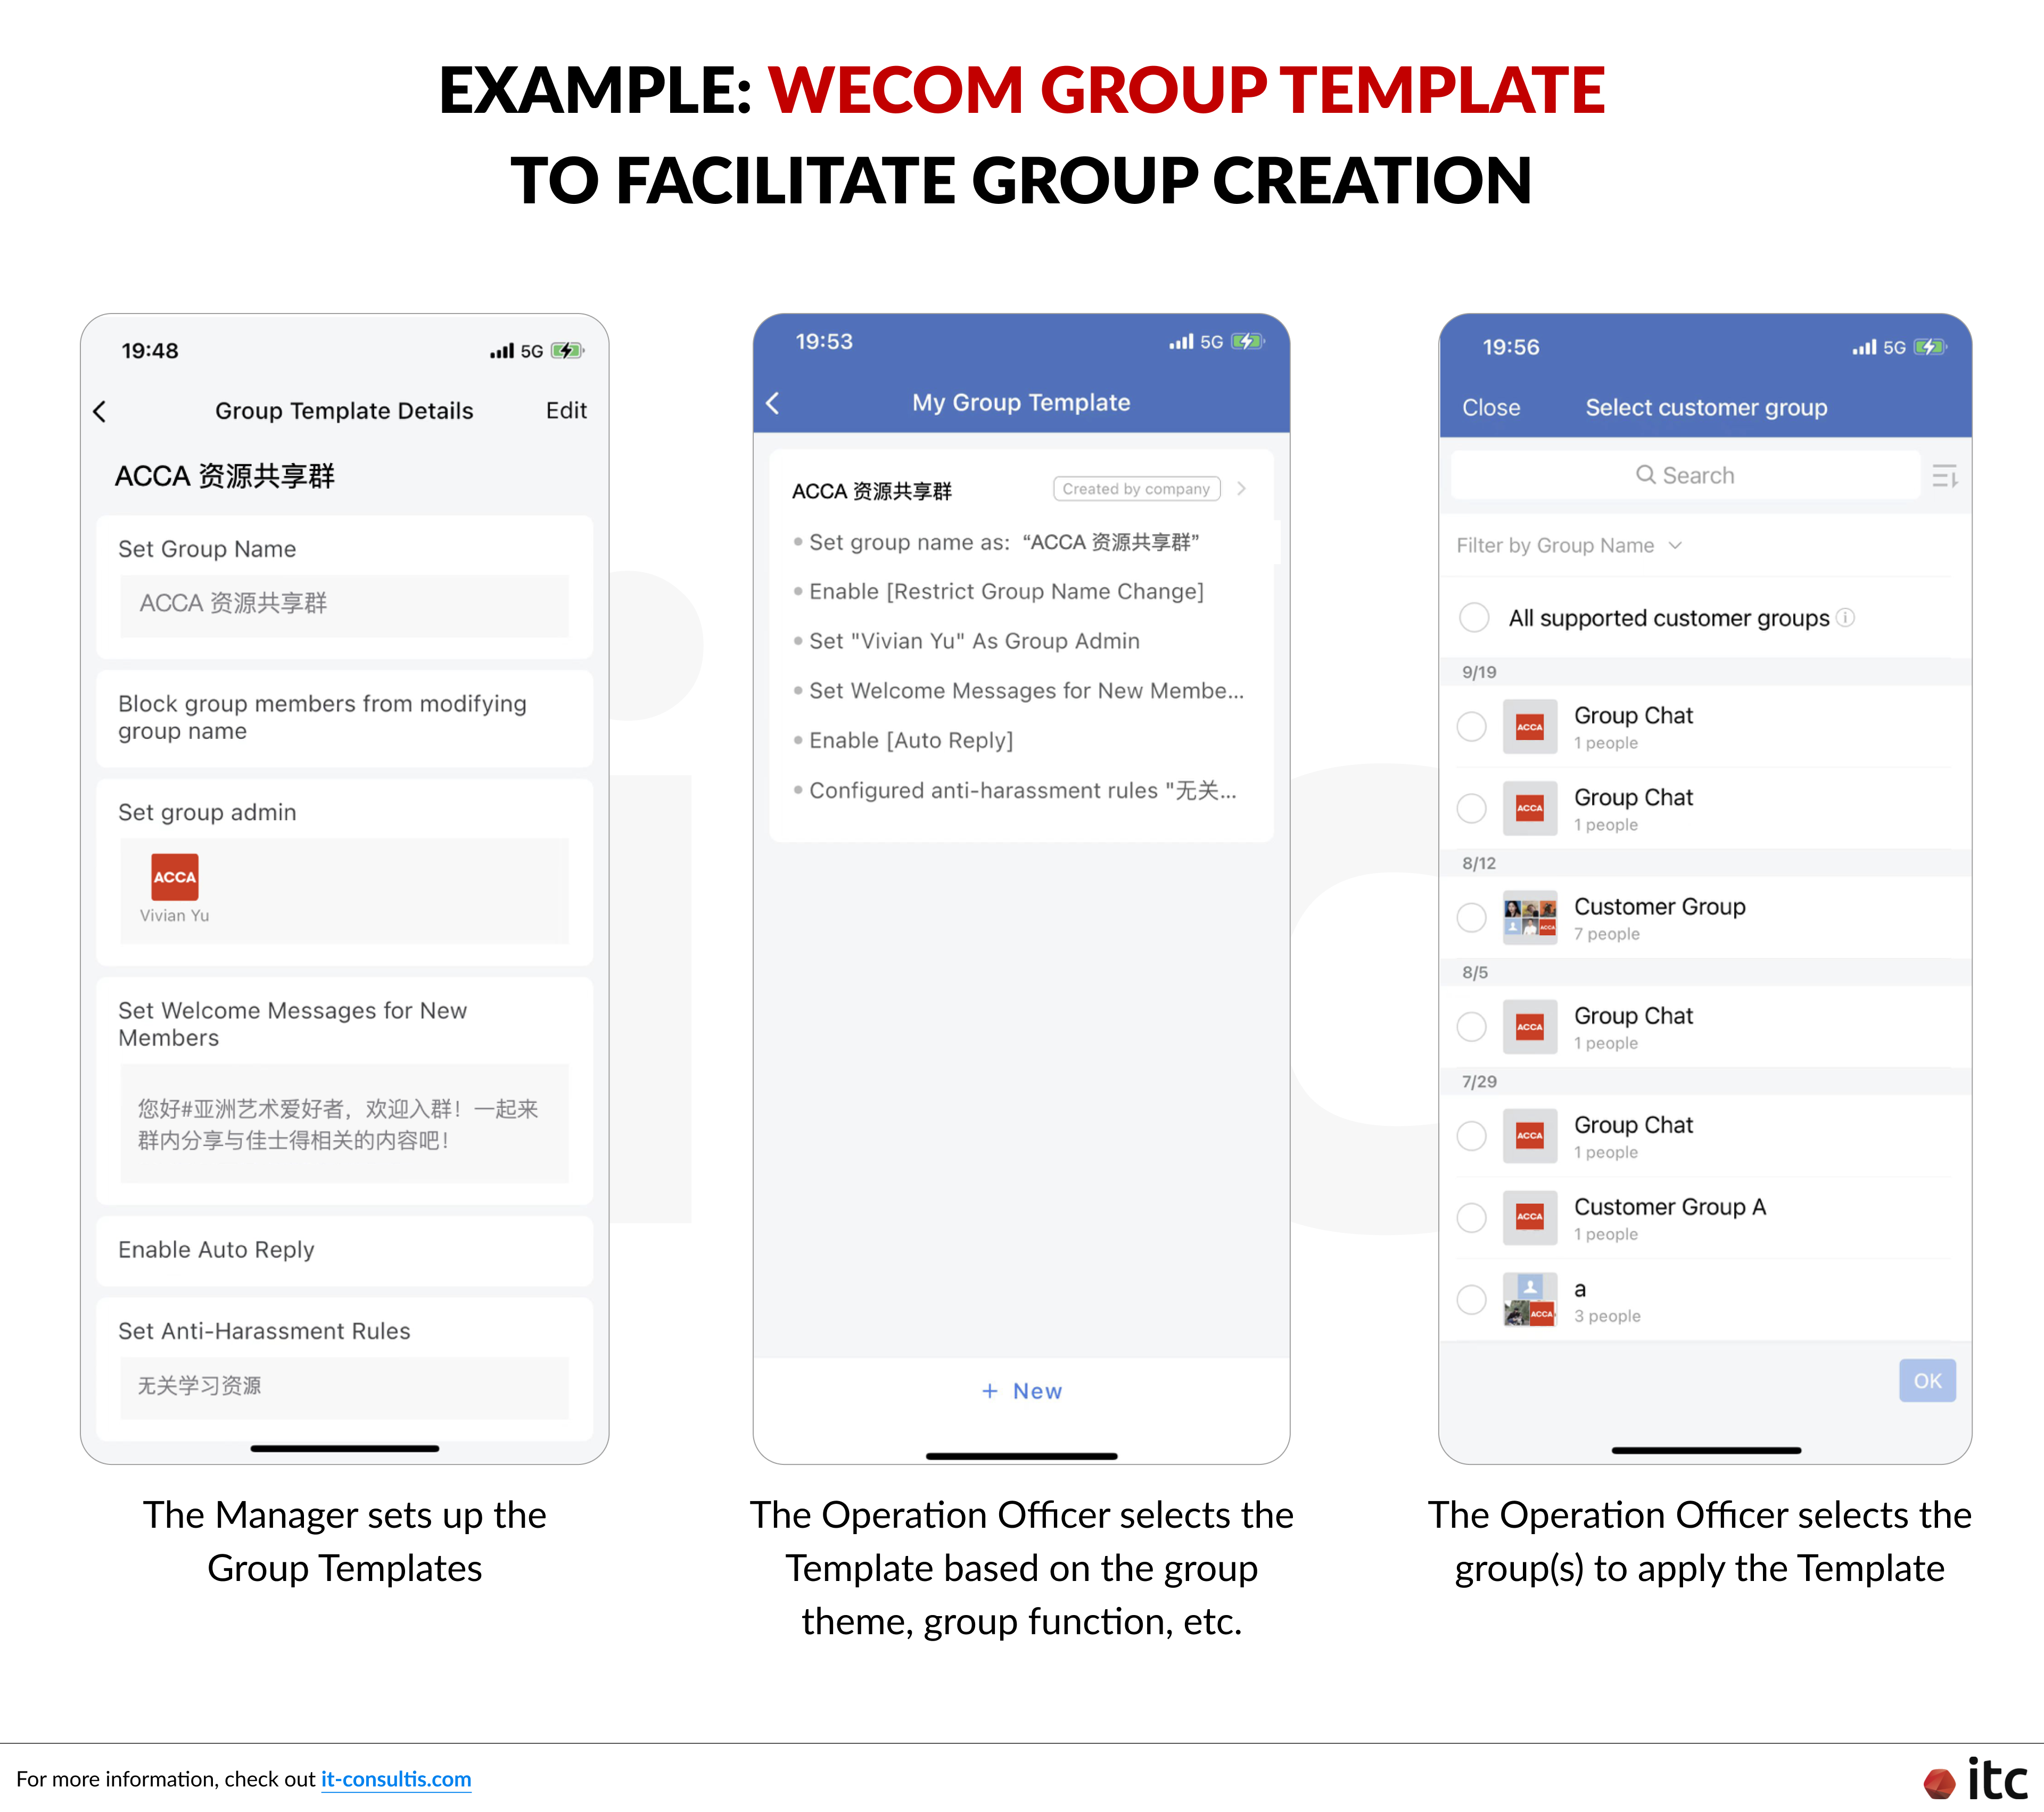 Example of setting up a WeCom group template to facilitate future group creation